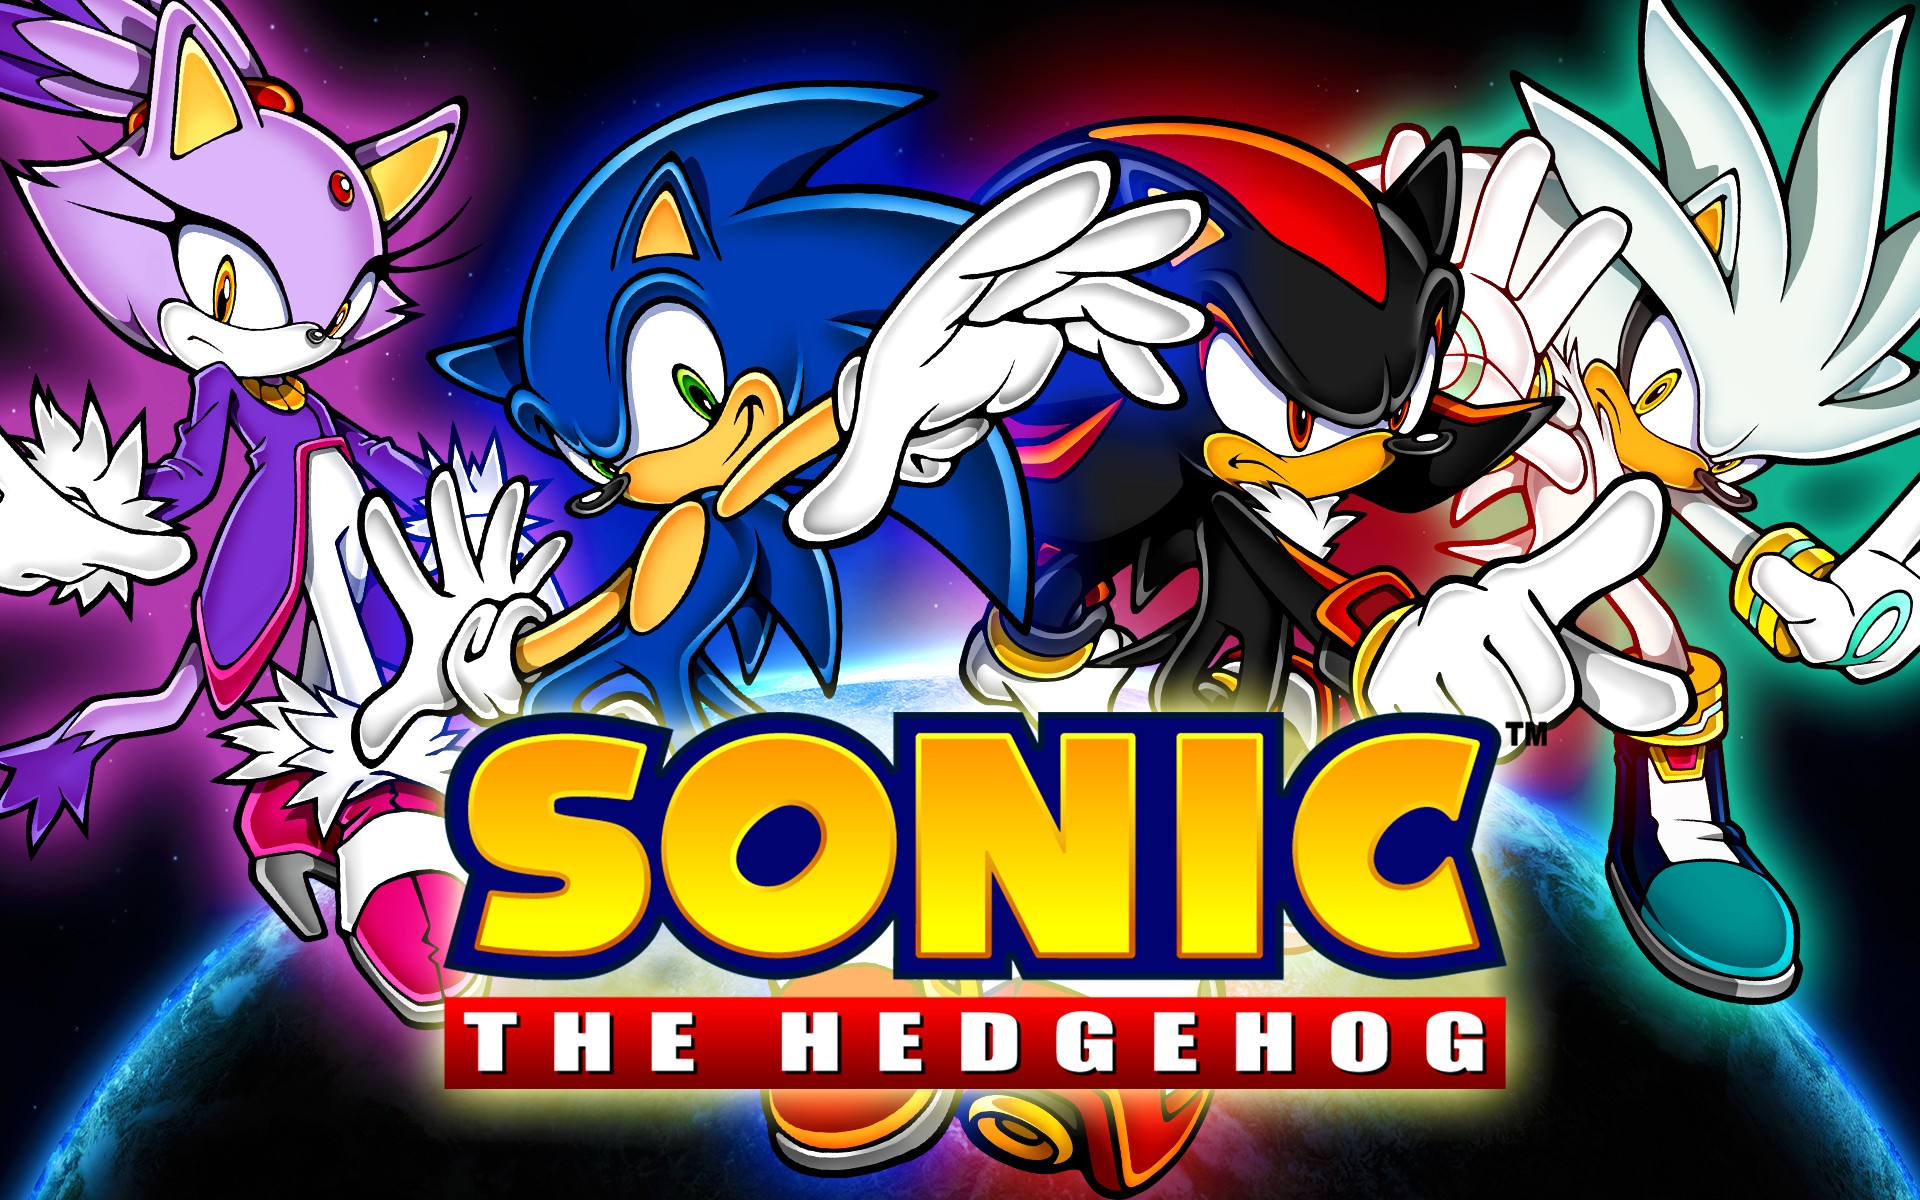 sonic the hedgehog (2006), video game, blaze the cat, shadow the hedgehog, silver the hedgehog, sonic the hedgehog, sonic